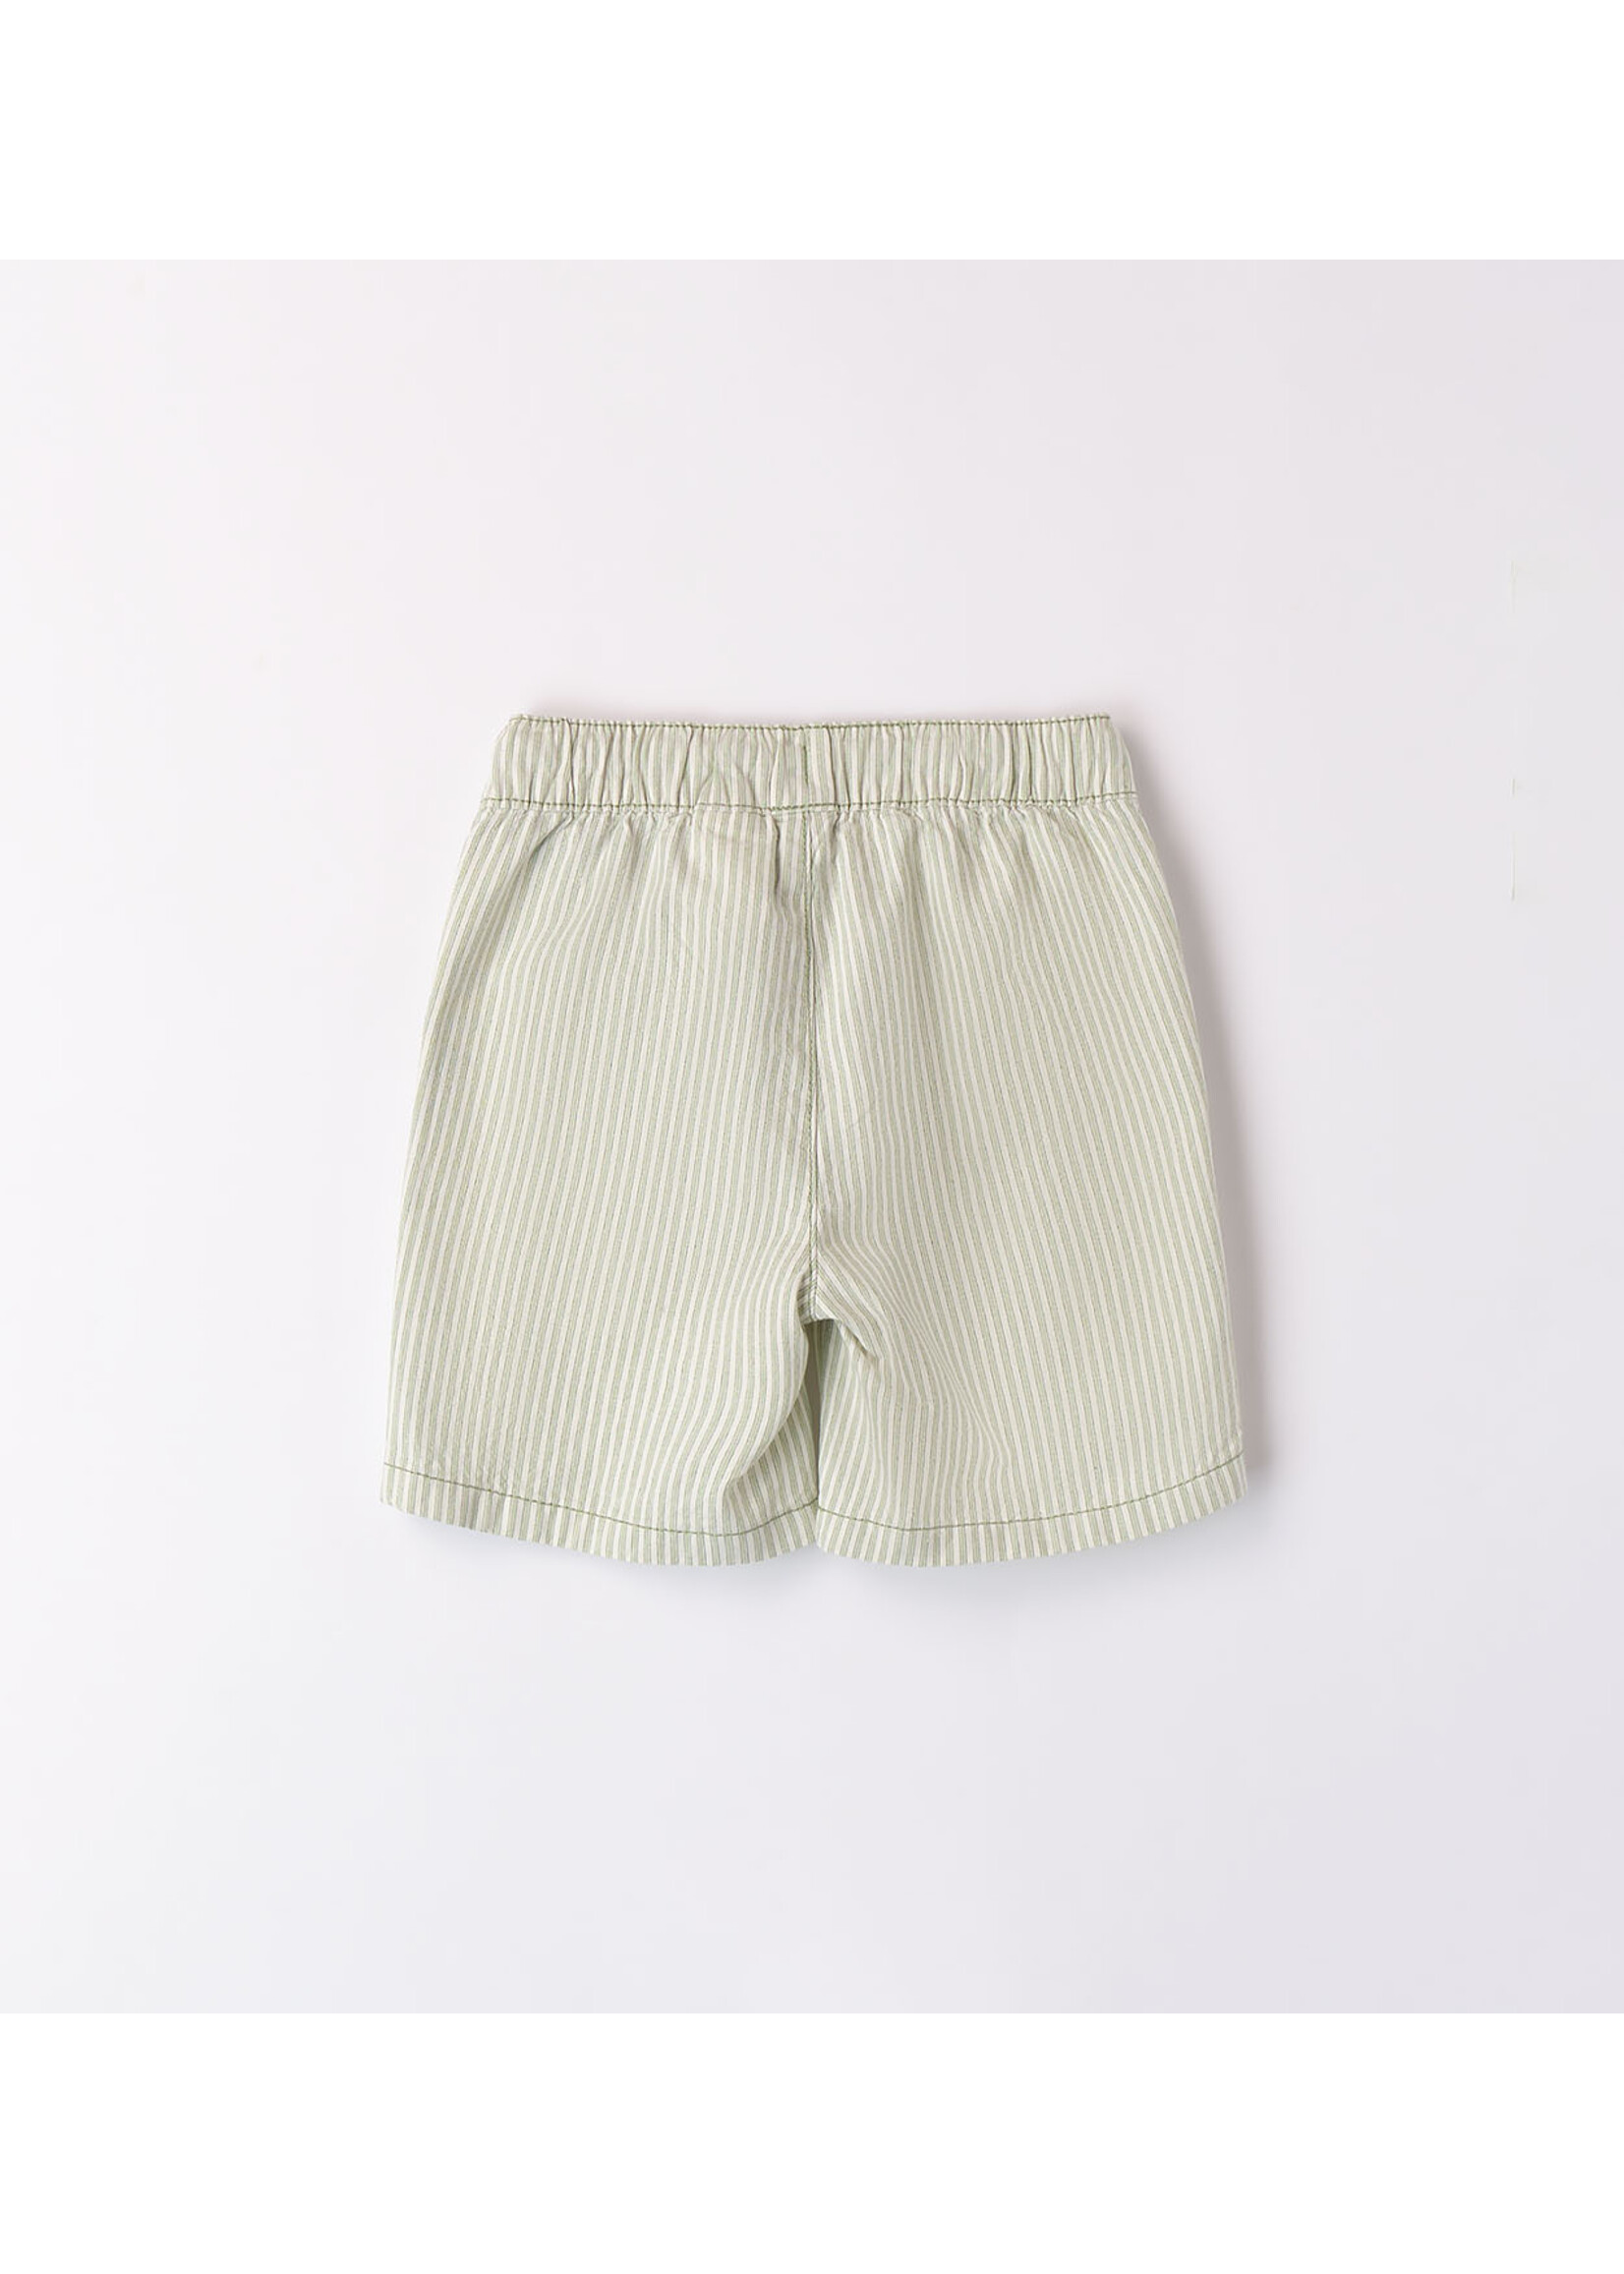 Ido 48693 SHORT WOVEN TROUSERS OLIVE GREEN